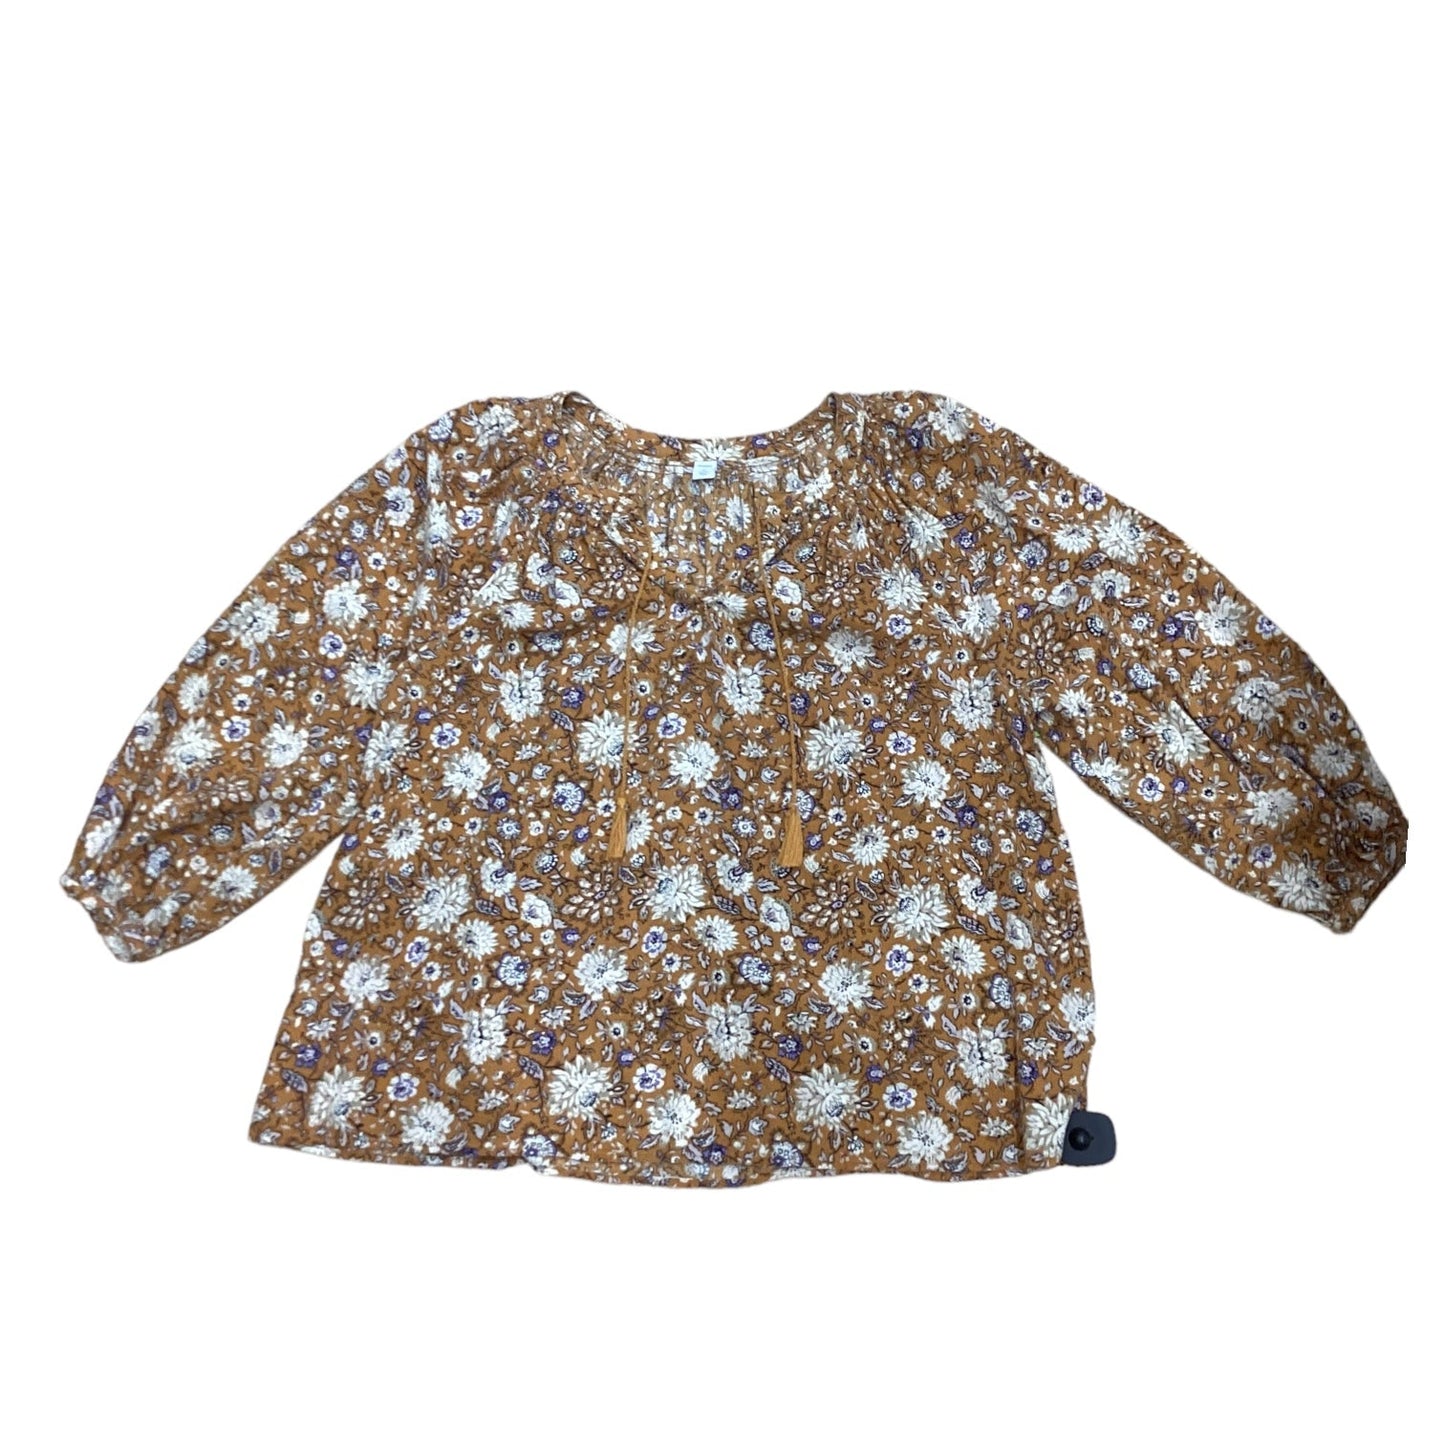 Floral Top Long Sleeve Old Navy, Size Xl